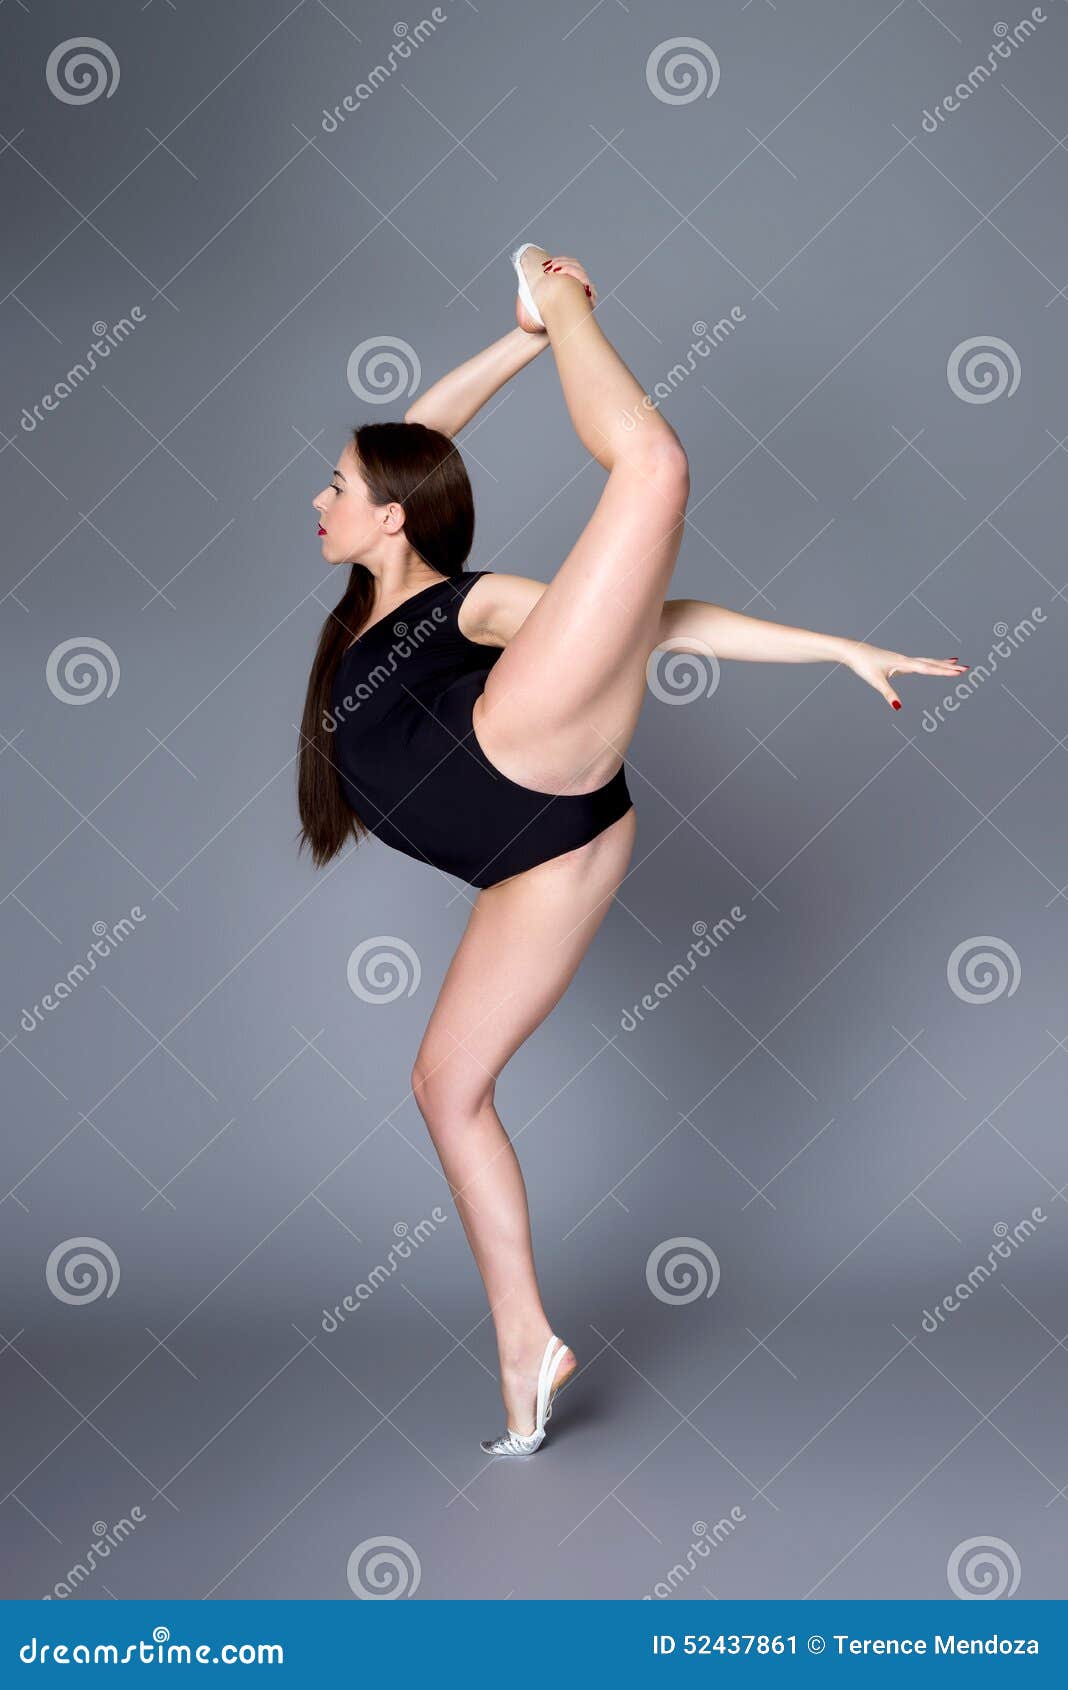 Nude Female Contortionists 92